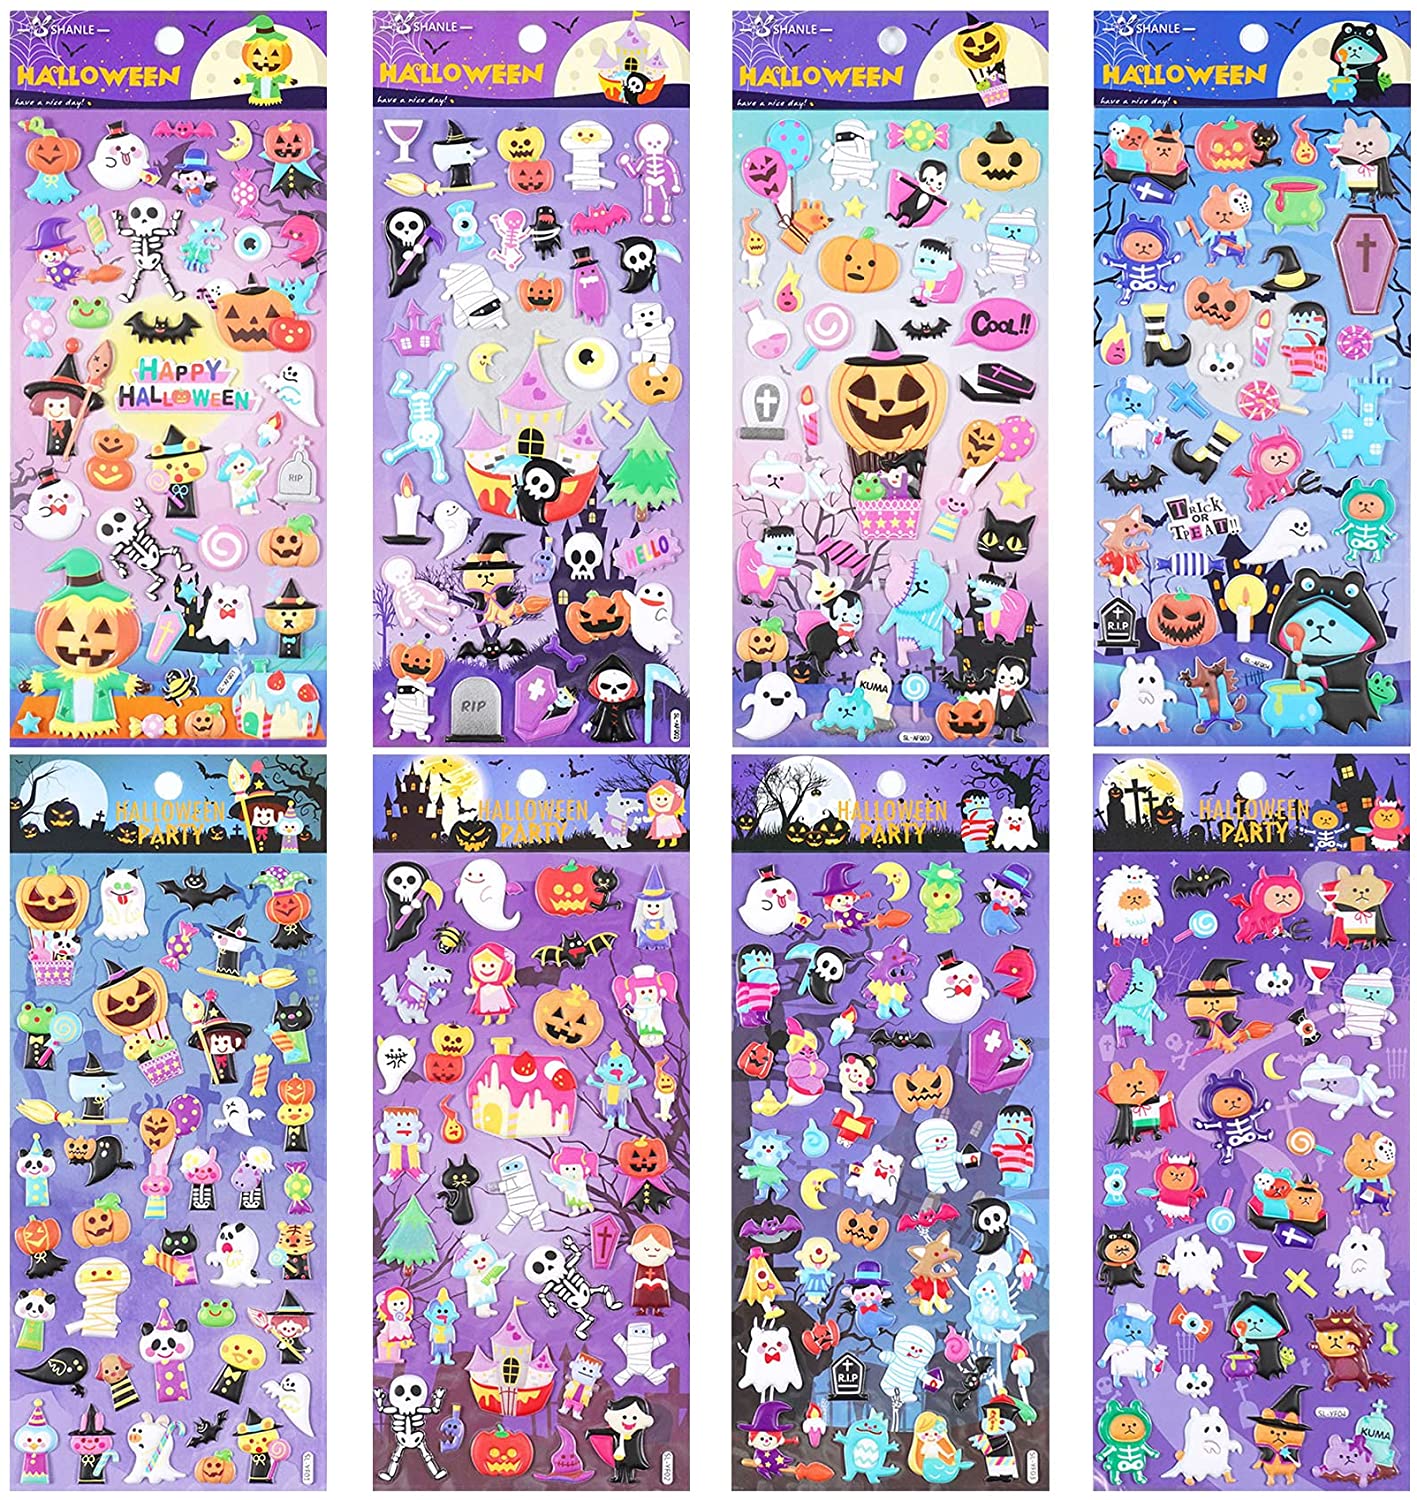 Kids Stickers 8 Different Sheets, Halloween 3d Modern Puffy StickerS Ghost Stickers For Kids, Bulk Scrapbooking Stickers Of Ghost, Mummy, Vampire, Pumpkin, Bat, Stickers For Boys Girls Party Favors